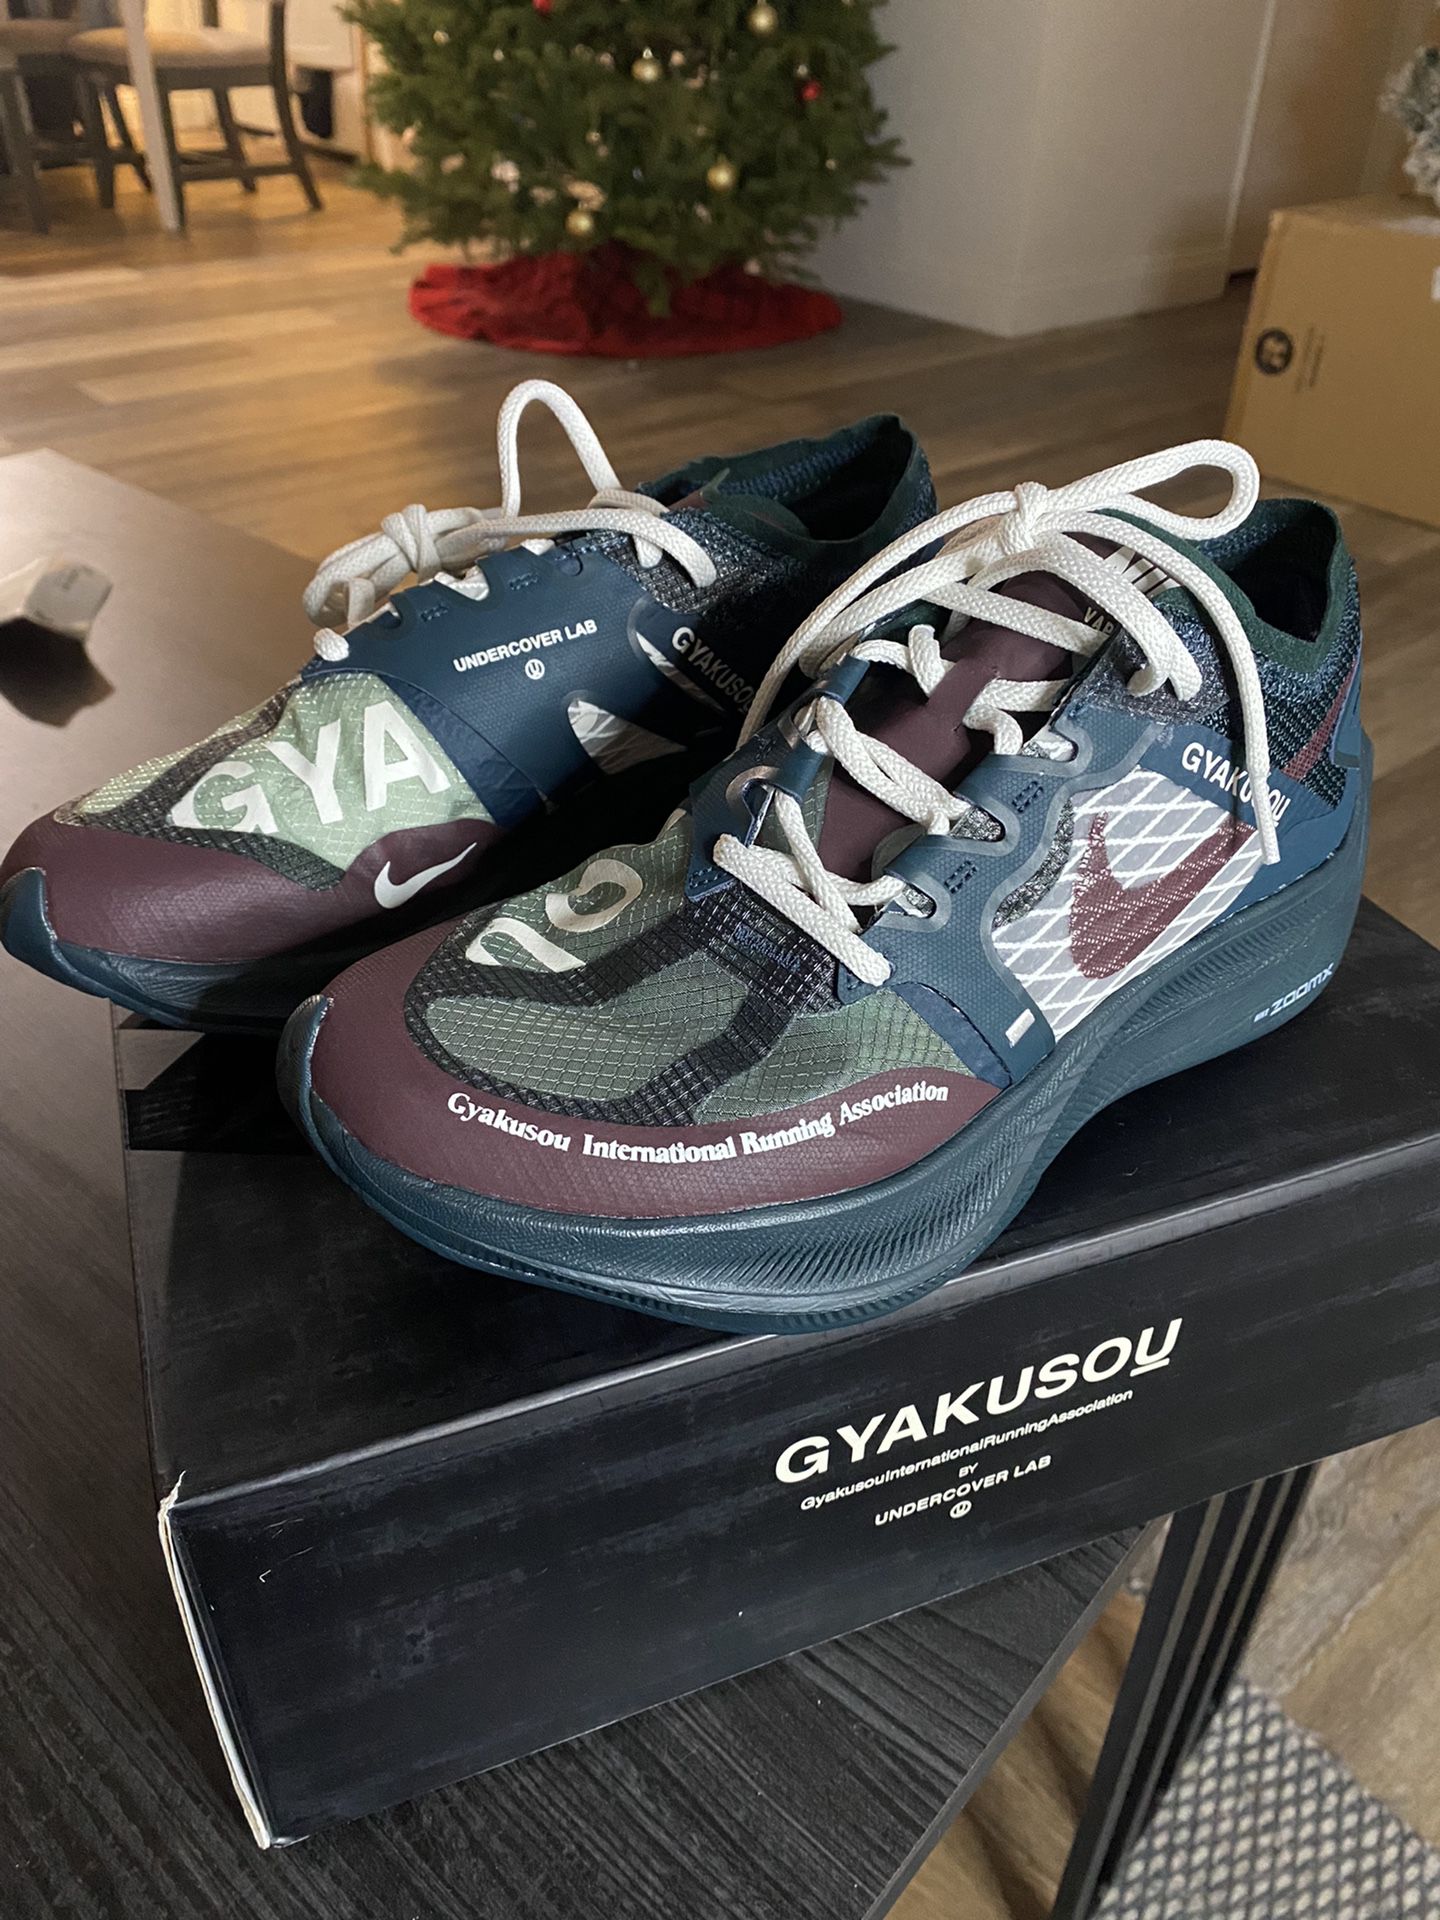 Gyakusou Midnight Running Shoe Men's 8.5 for Sale in Los Angeles, CA - OfferUp